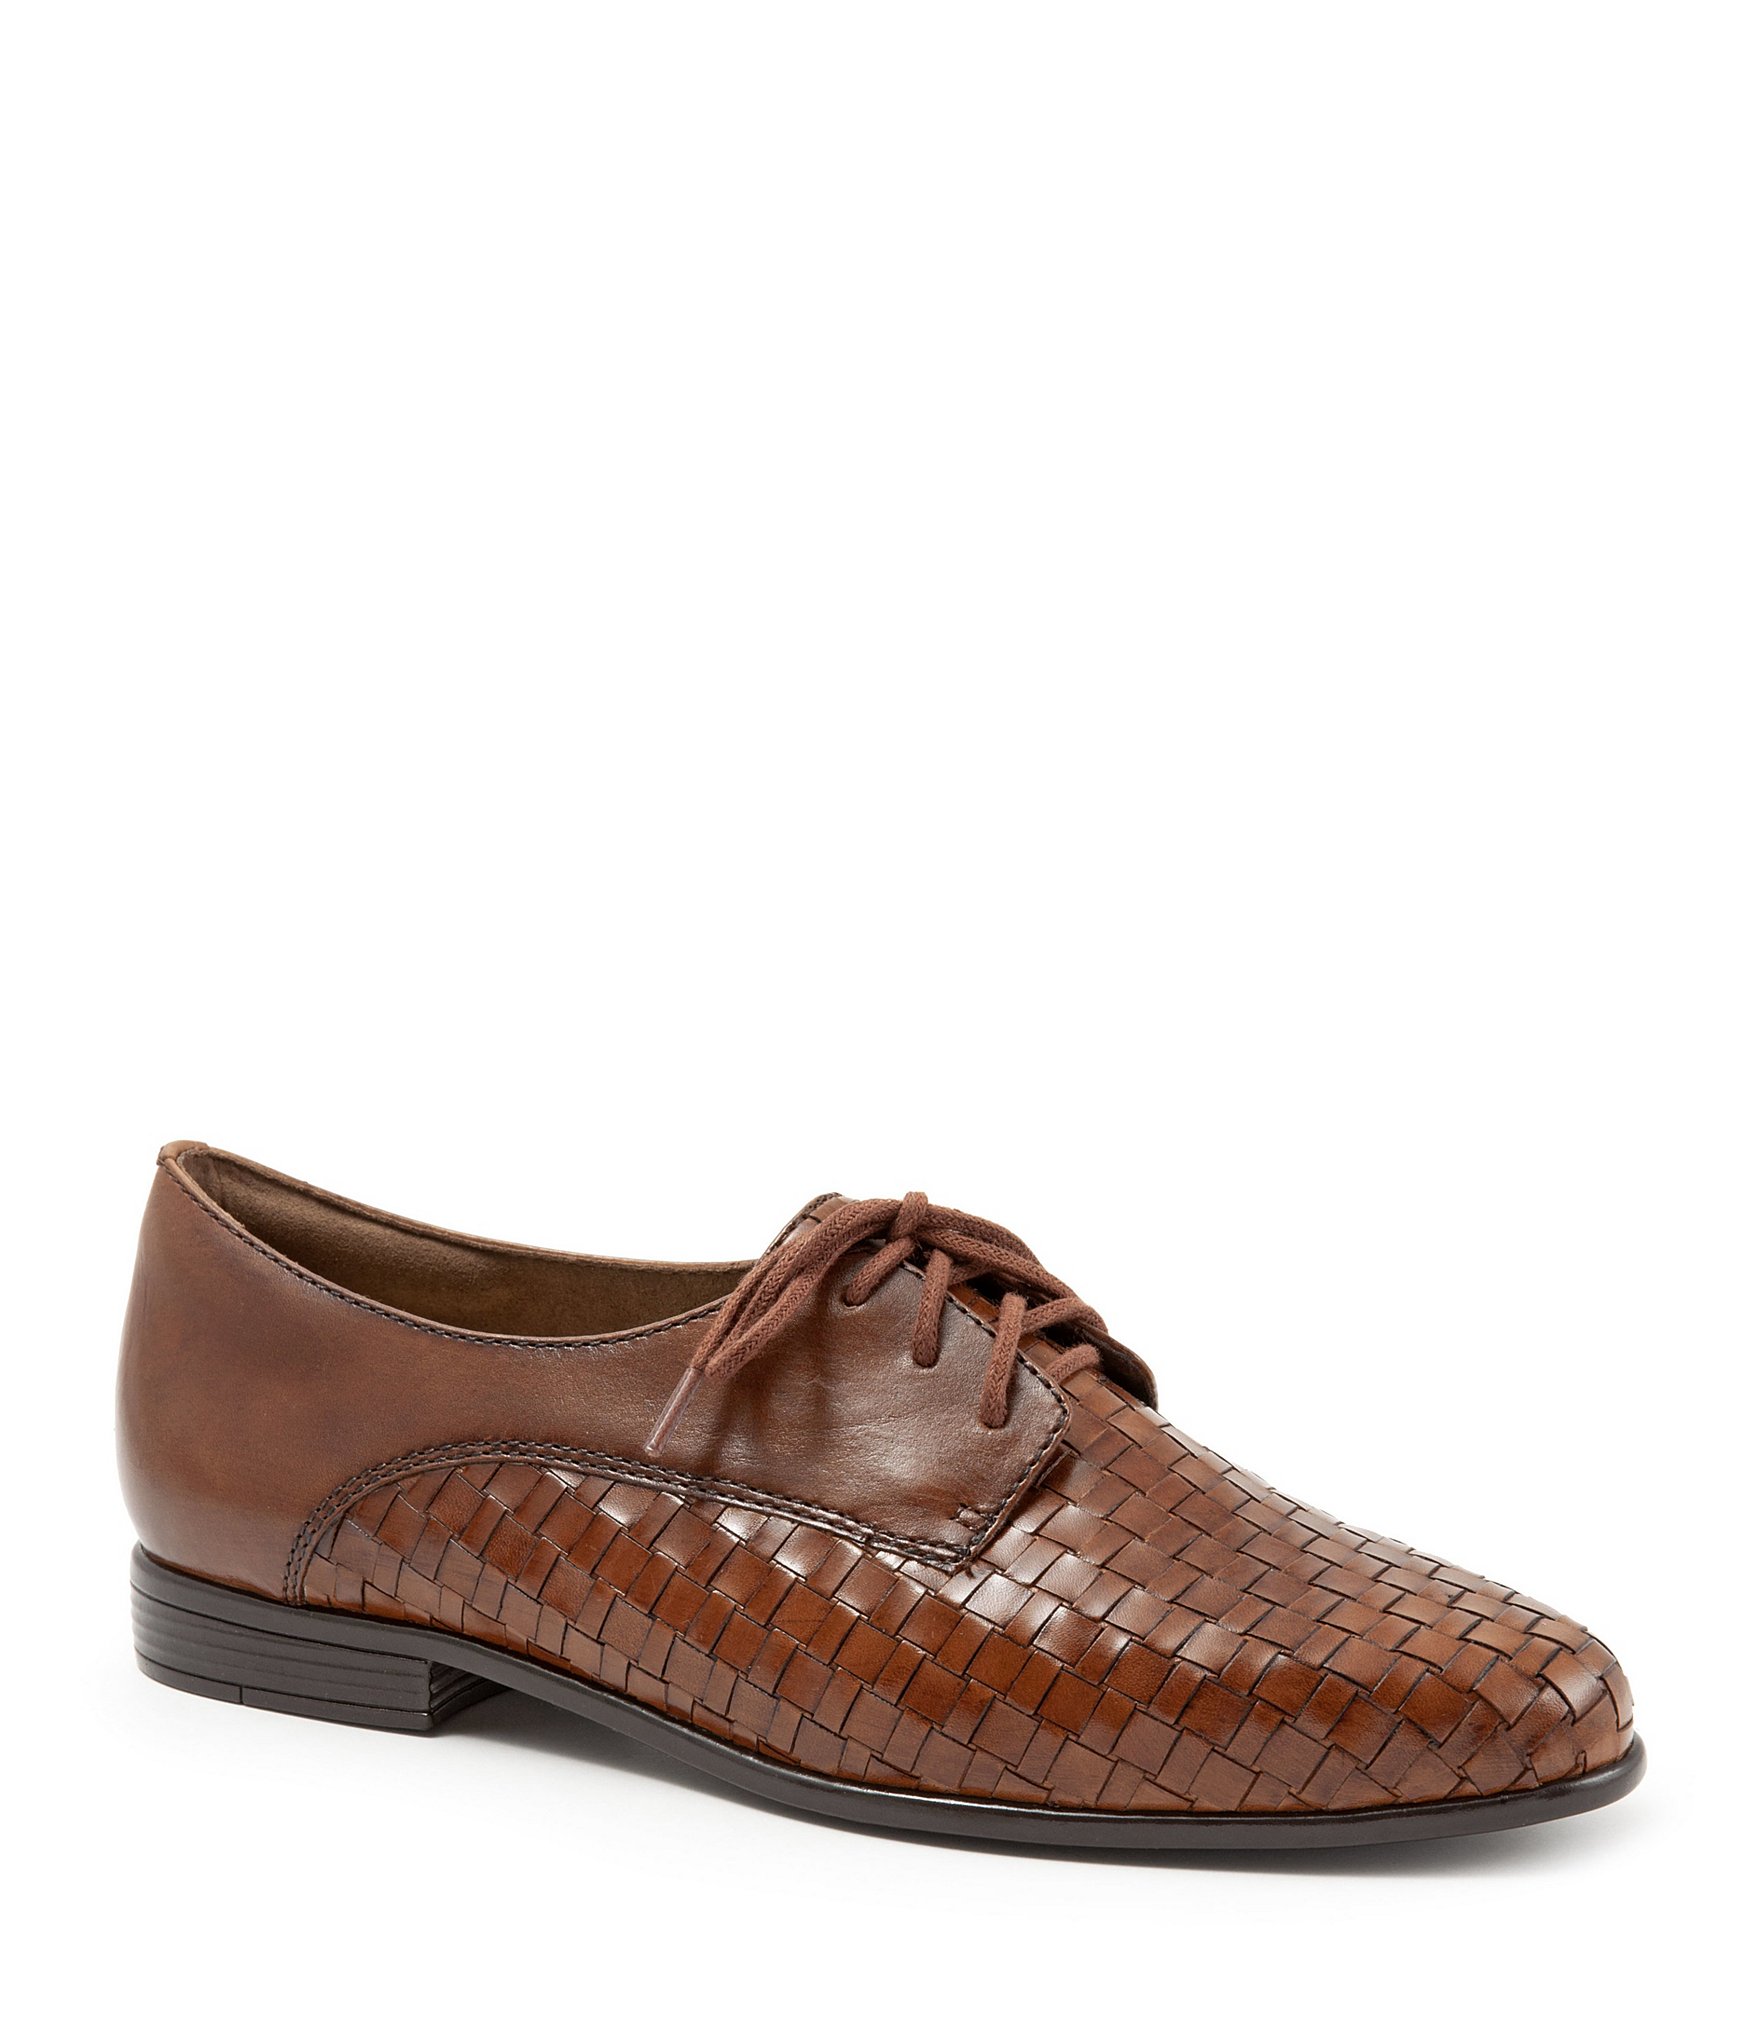 Trotters Lizzie Woven Leather Oxfords 